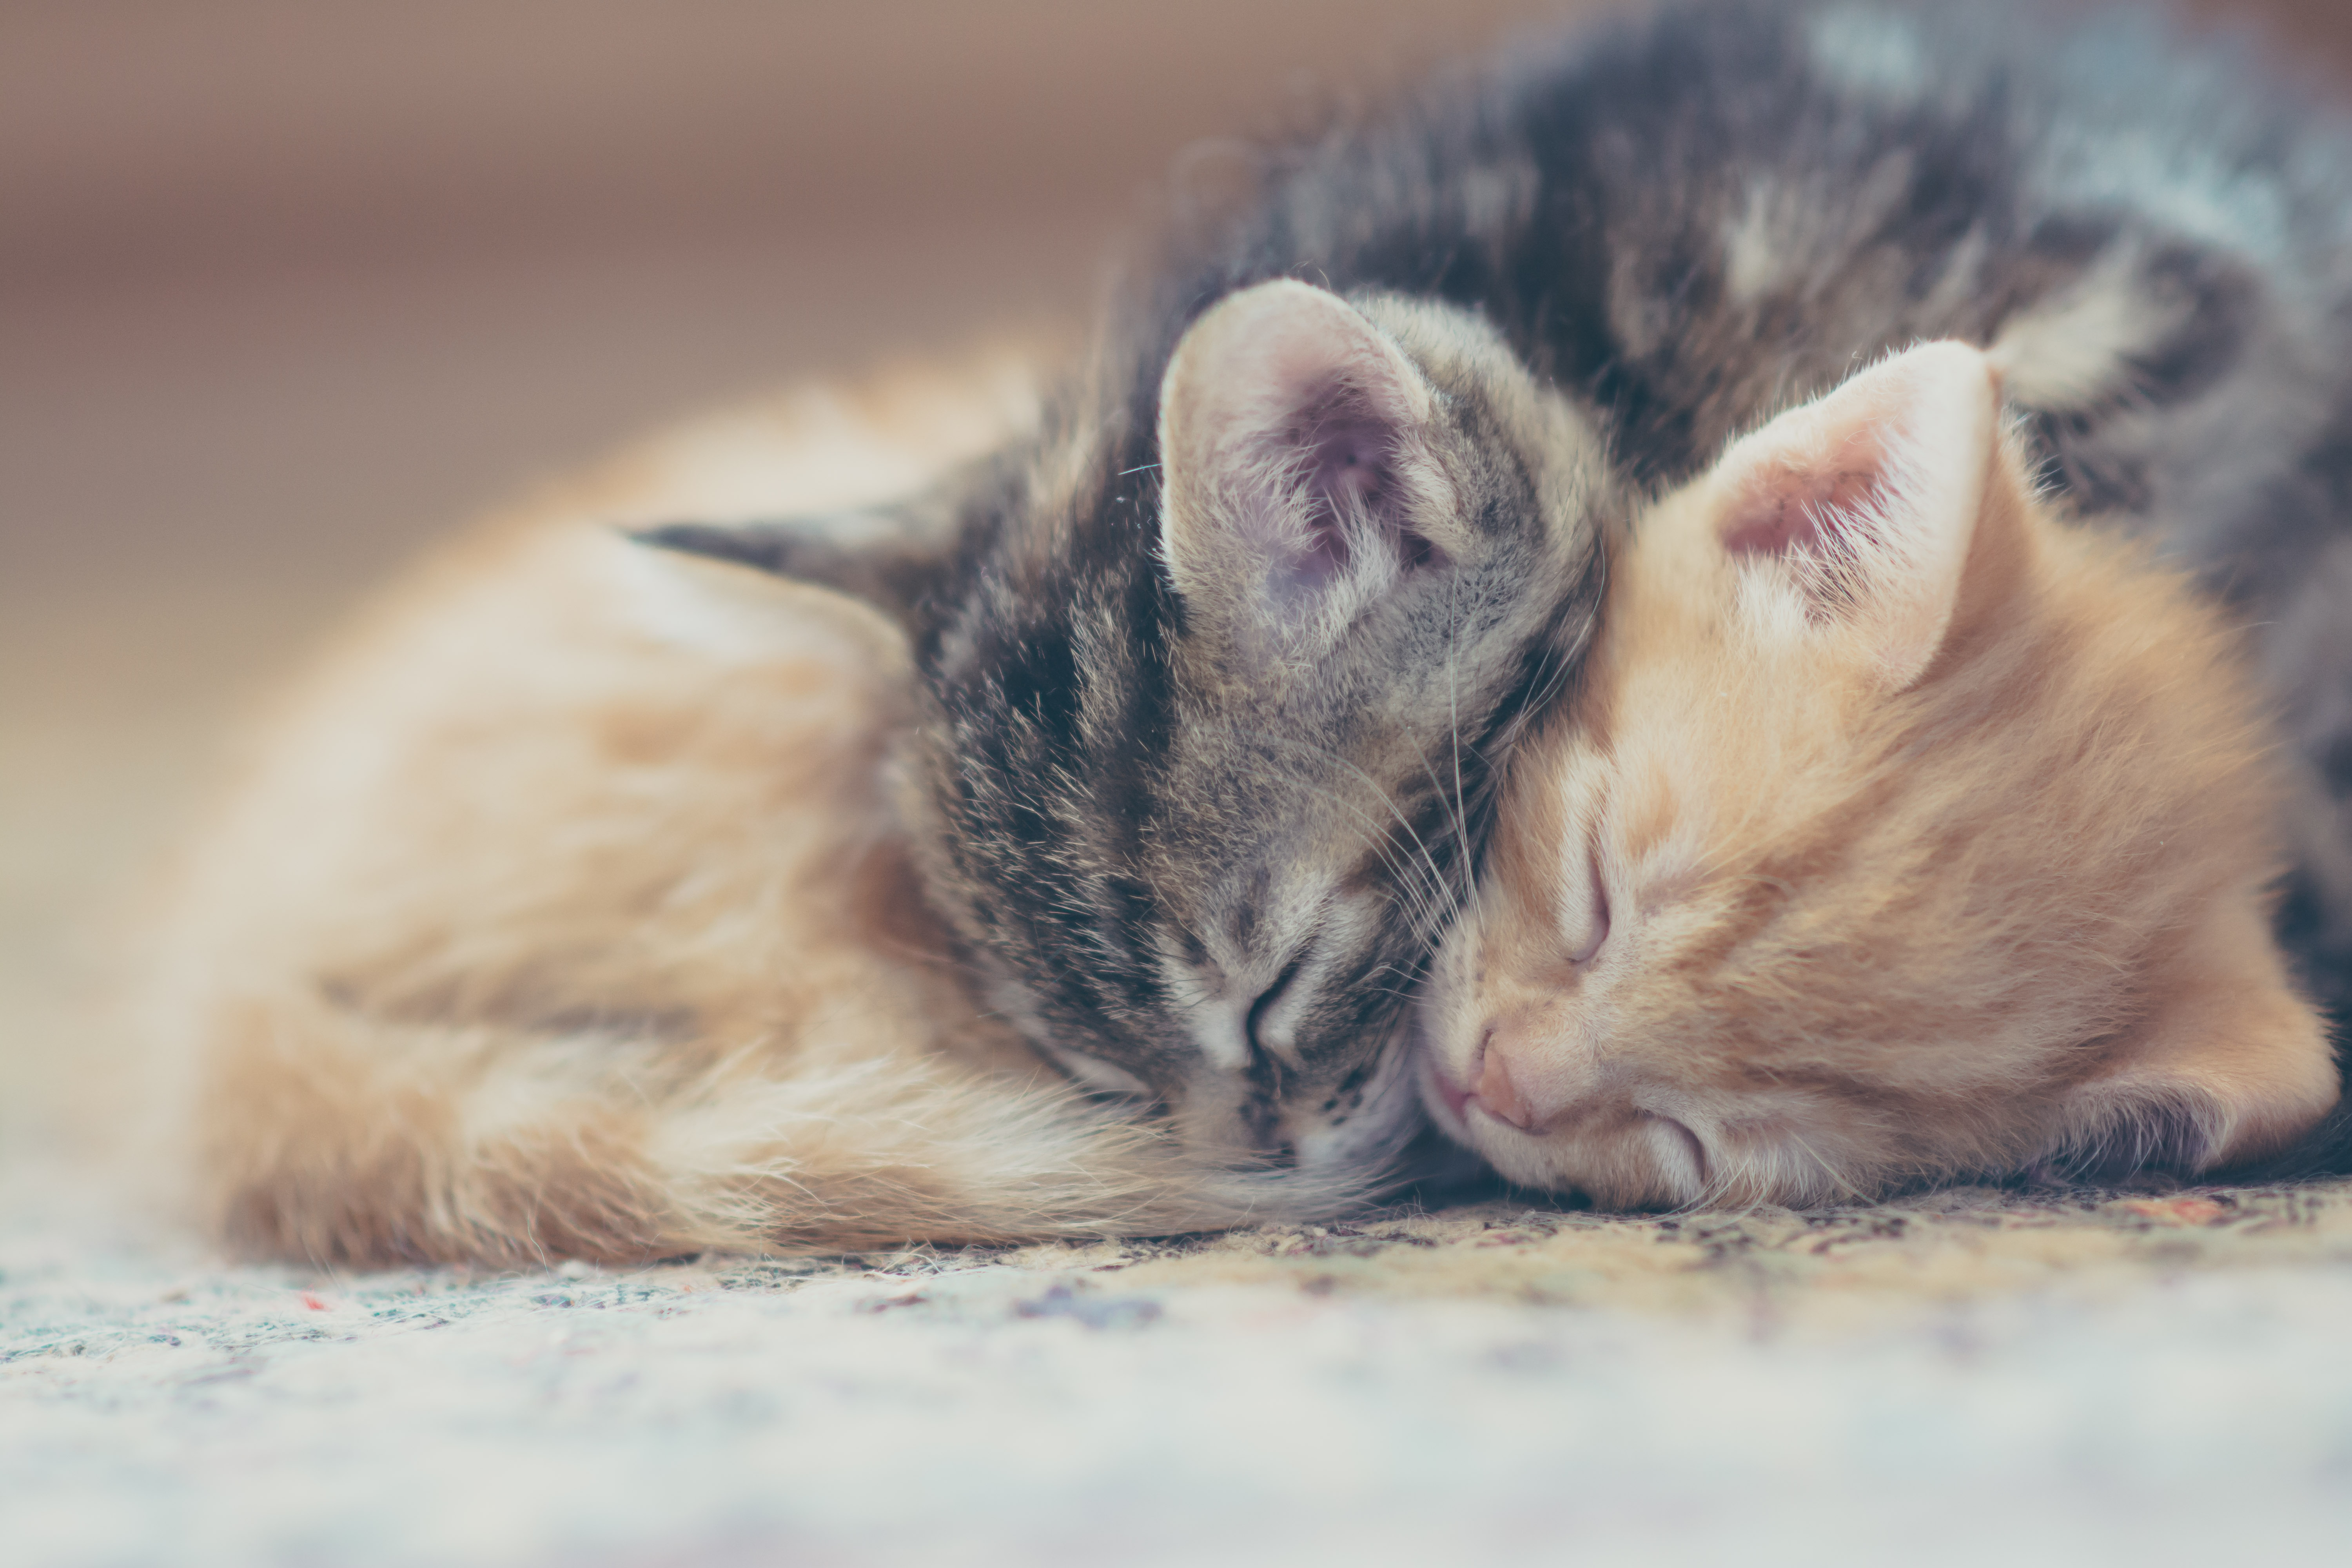 You Can Get a Real Job Cuddling With Cats All Day